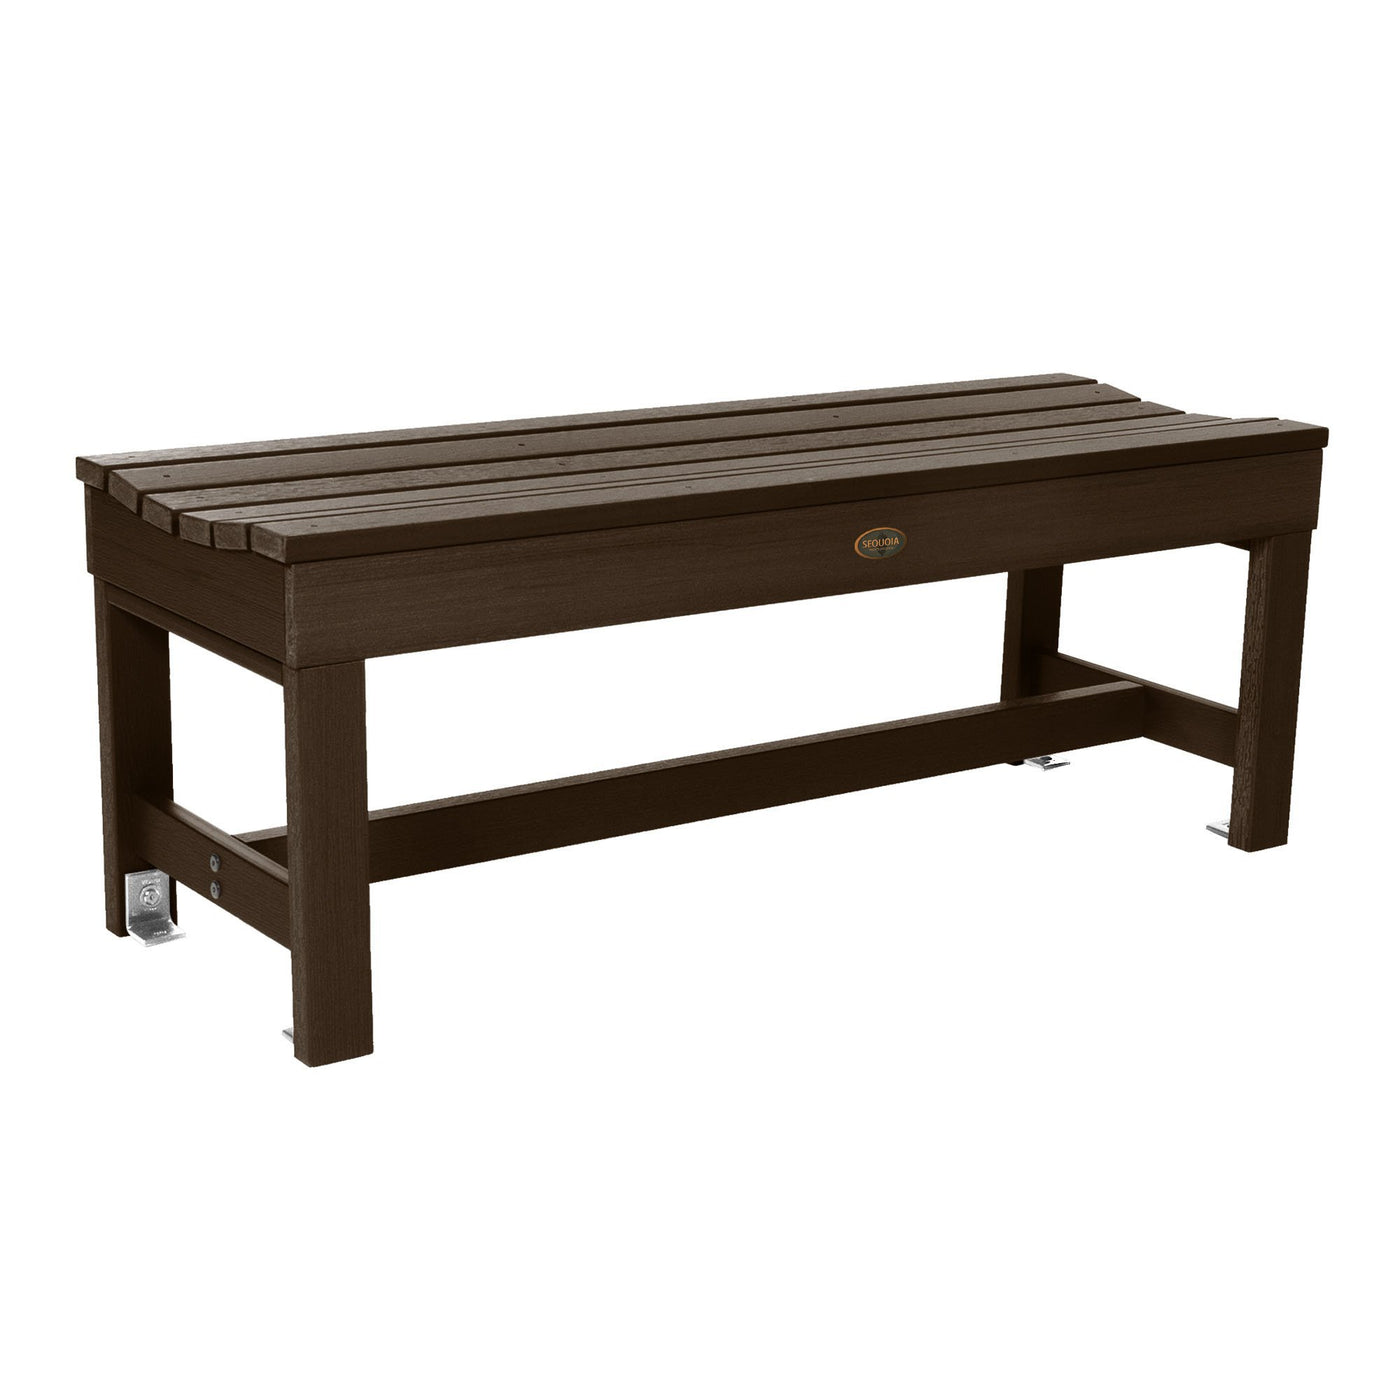 Commercial Grade "Weldon" 4ft Backless Bench Sequoia Professional Weathered Acorn 